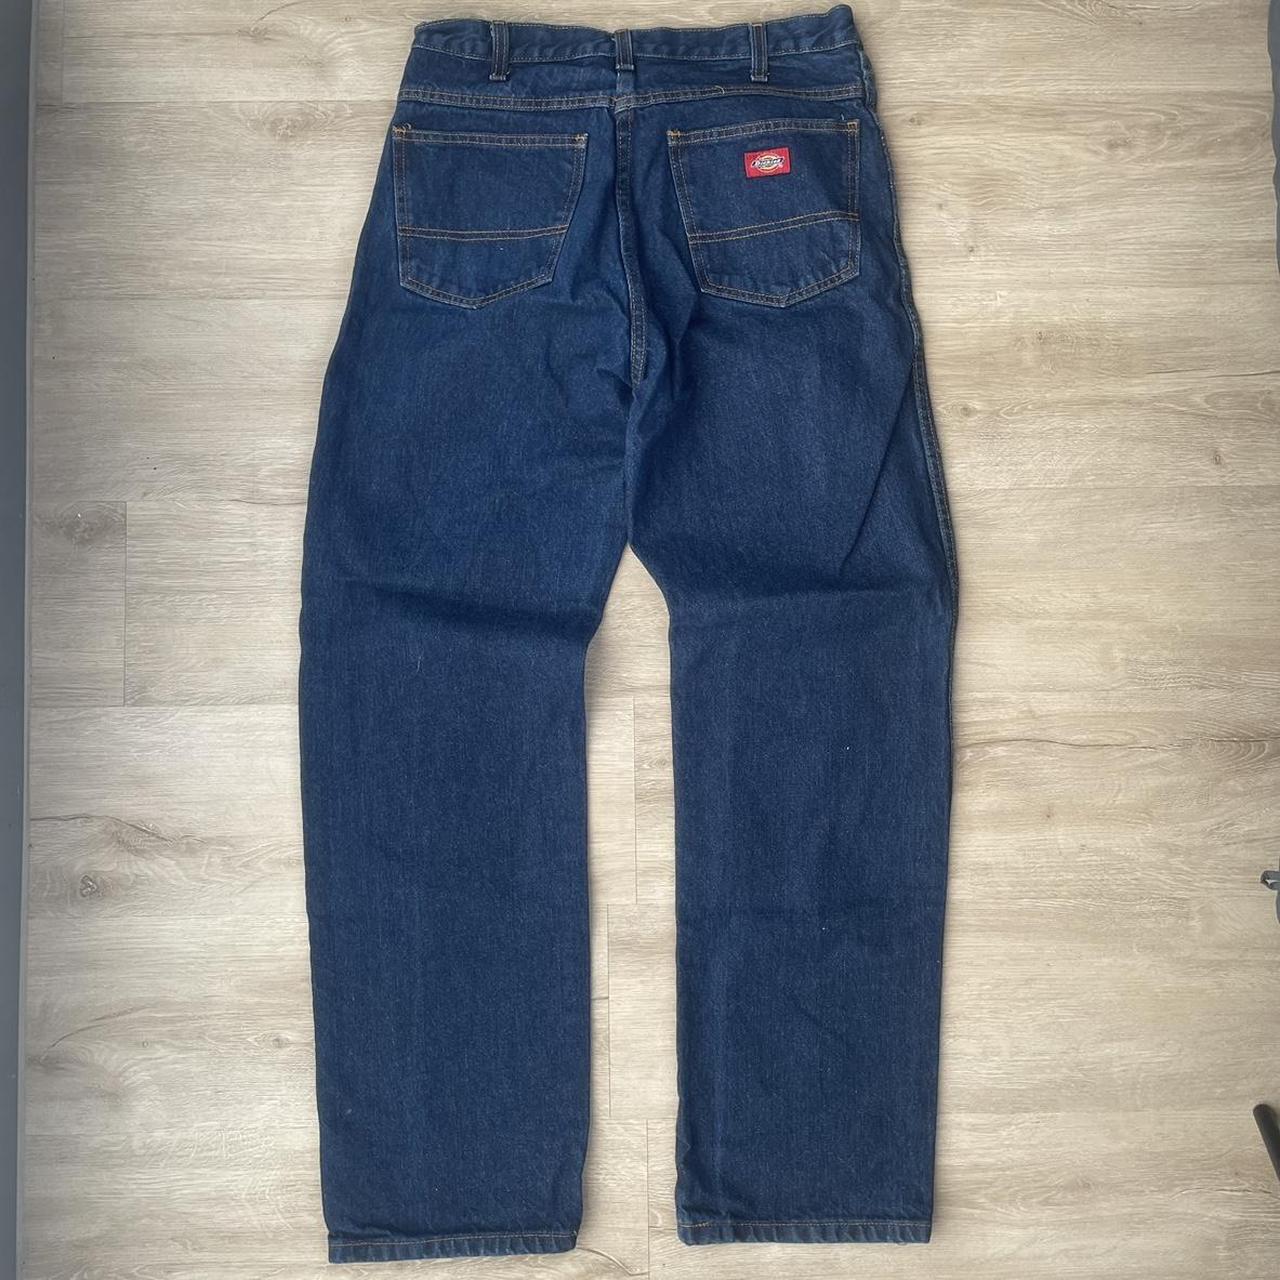 Dickies Men's Navy and Blue Jeans (3)